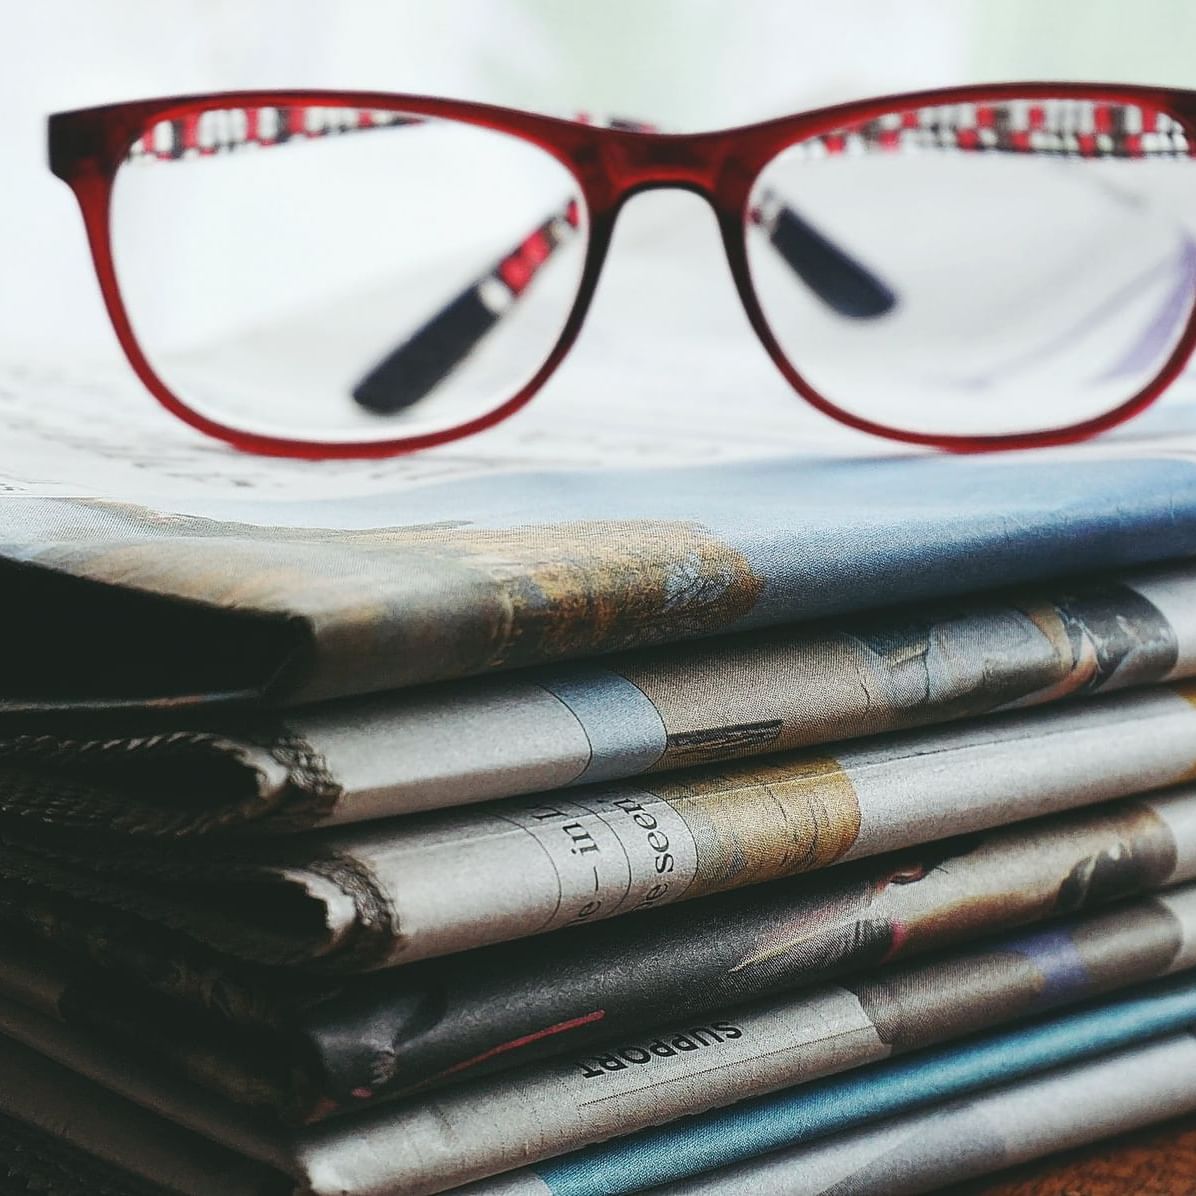 Pair of Spectacles on newspapers at Ubumwe Grande